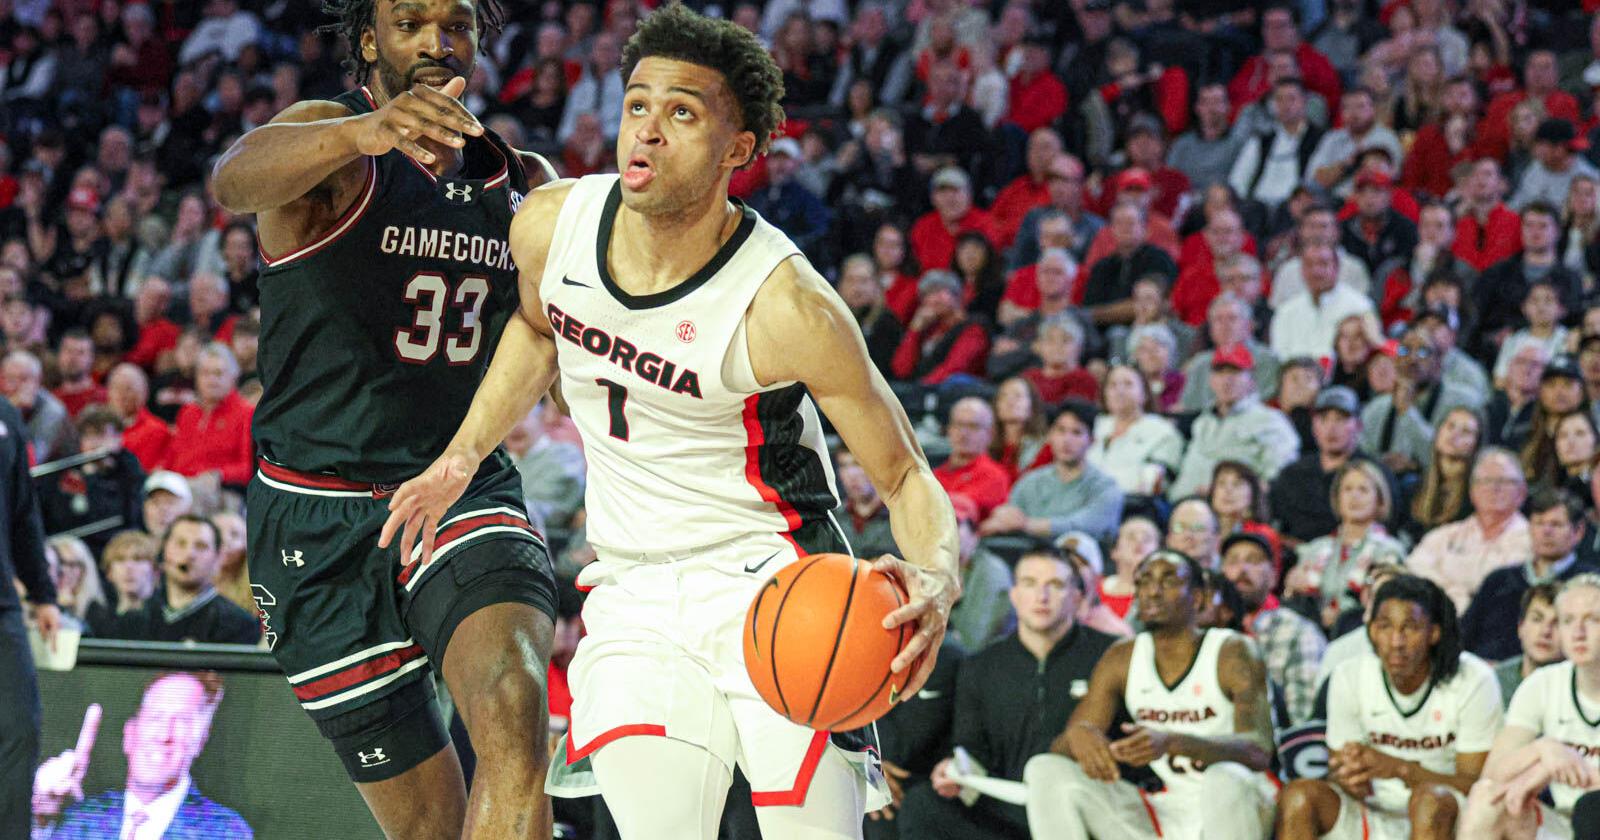 Two Georgia men’s basketball transfers find new homes